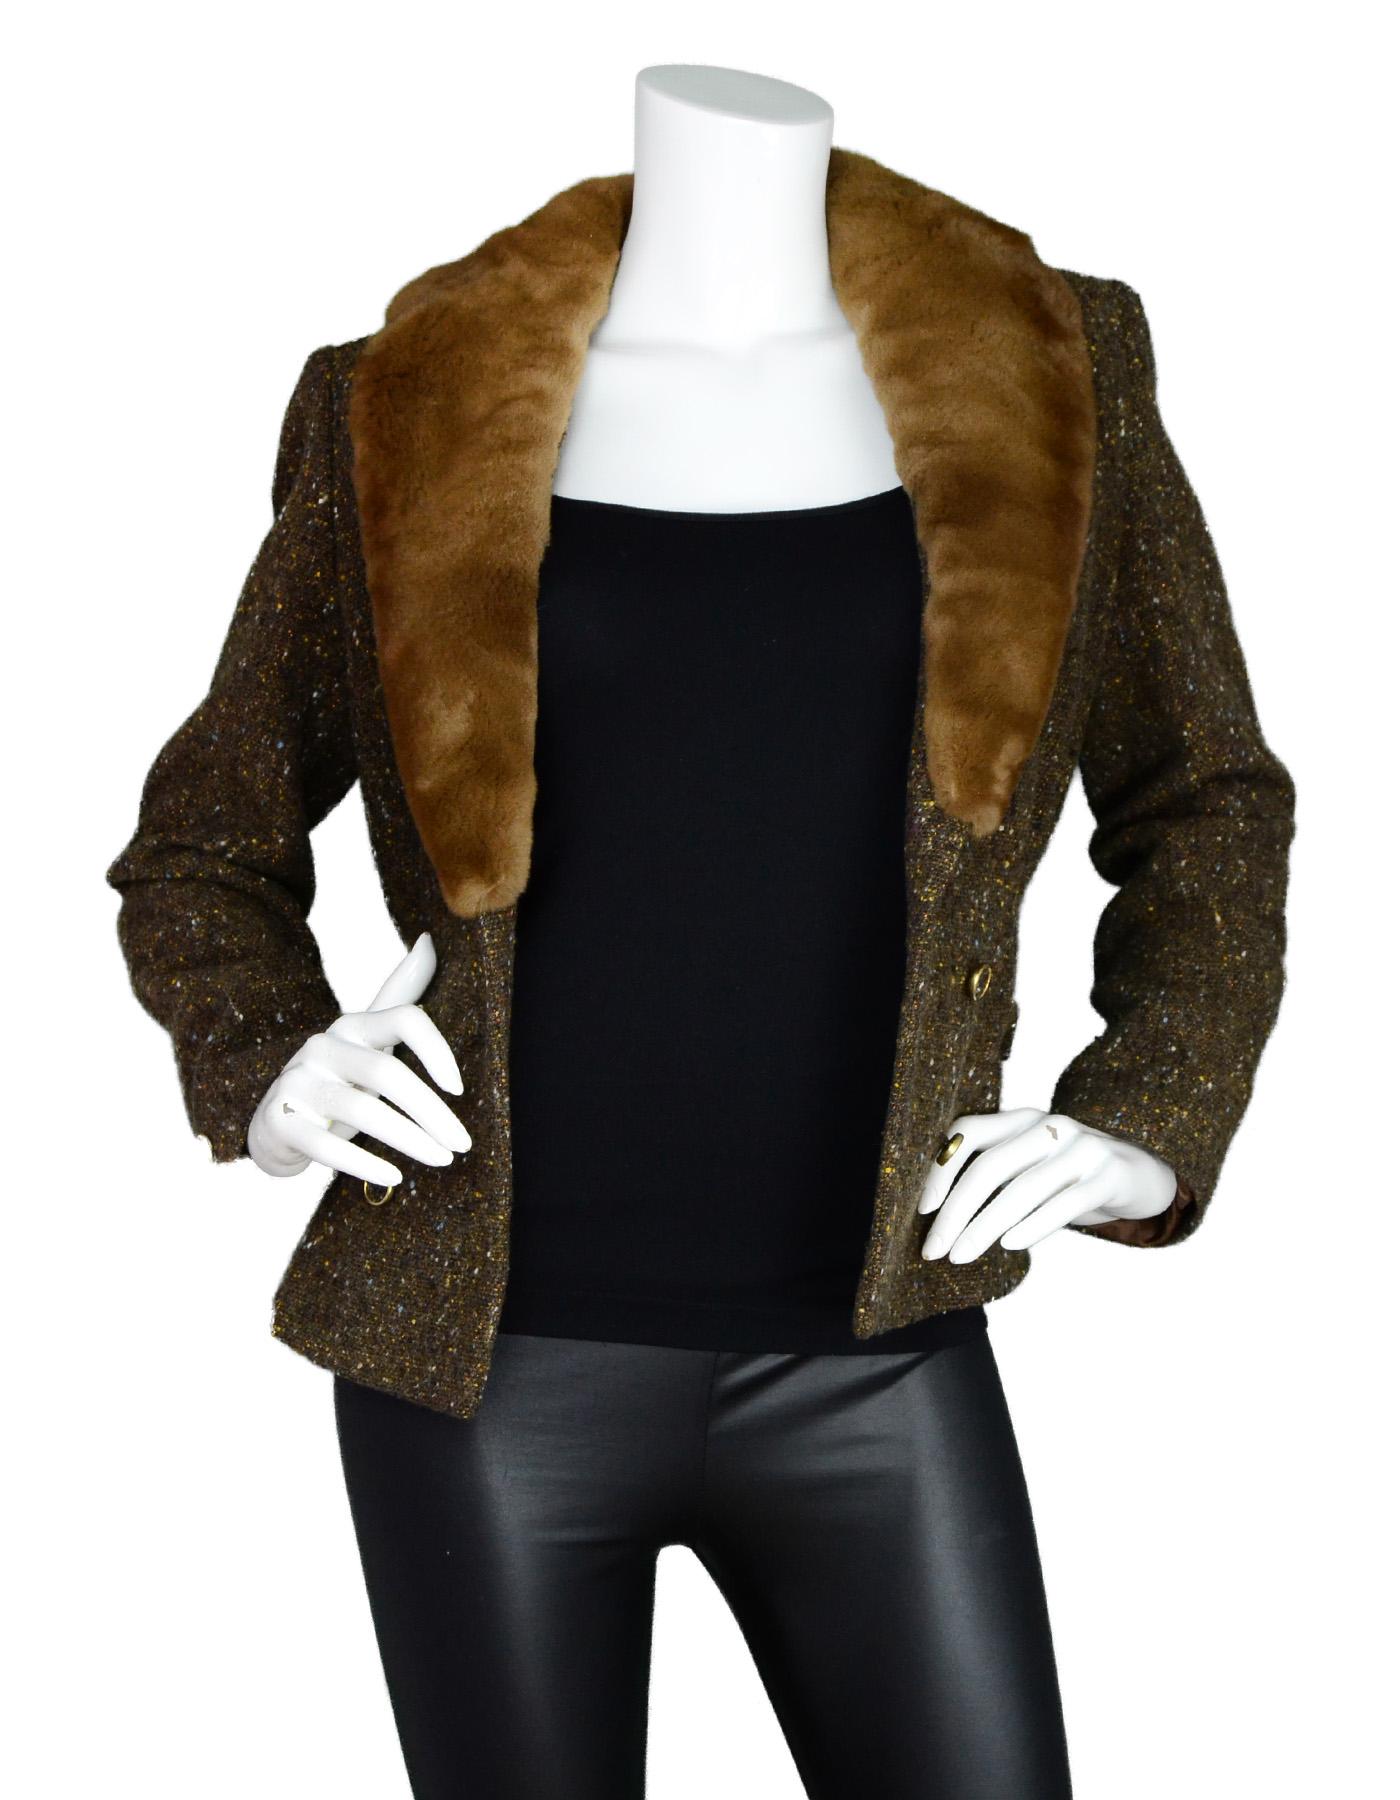 Blumarine Brown Tweed Double Breasted Jacket W/ Sheared Mink Collar Sz 42. Pictured With Matching Brown Tweed Pencil Skirt, Item #15870-19.

Made In: Italy
Color: Multi-tonal brown/bronze tweed
Materials: 77% wool 18% nylon, 5% rayon
Lining: 60%